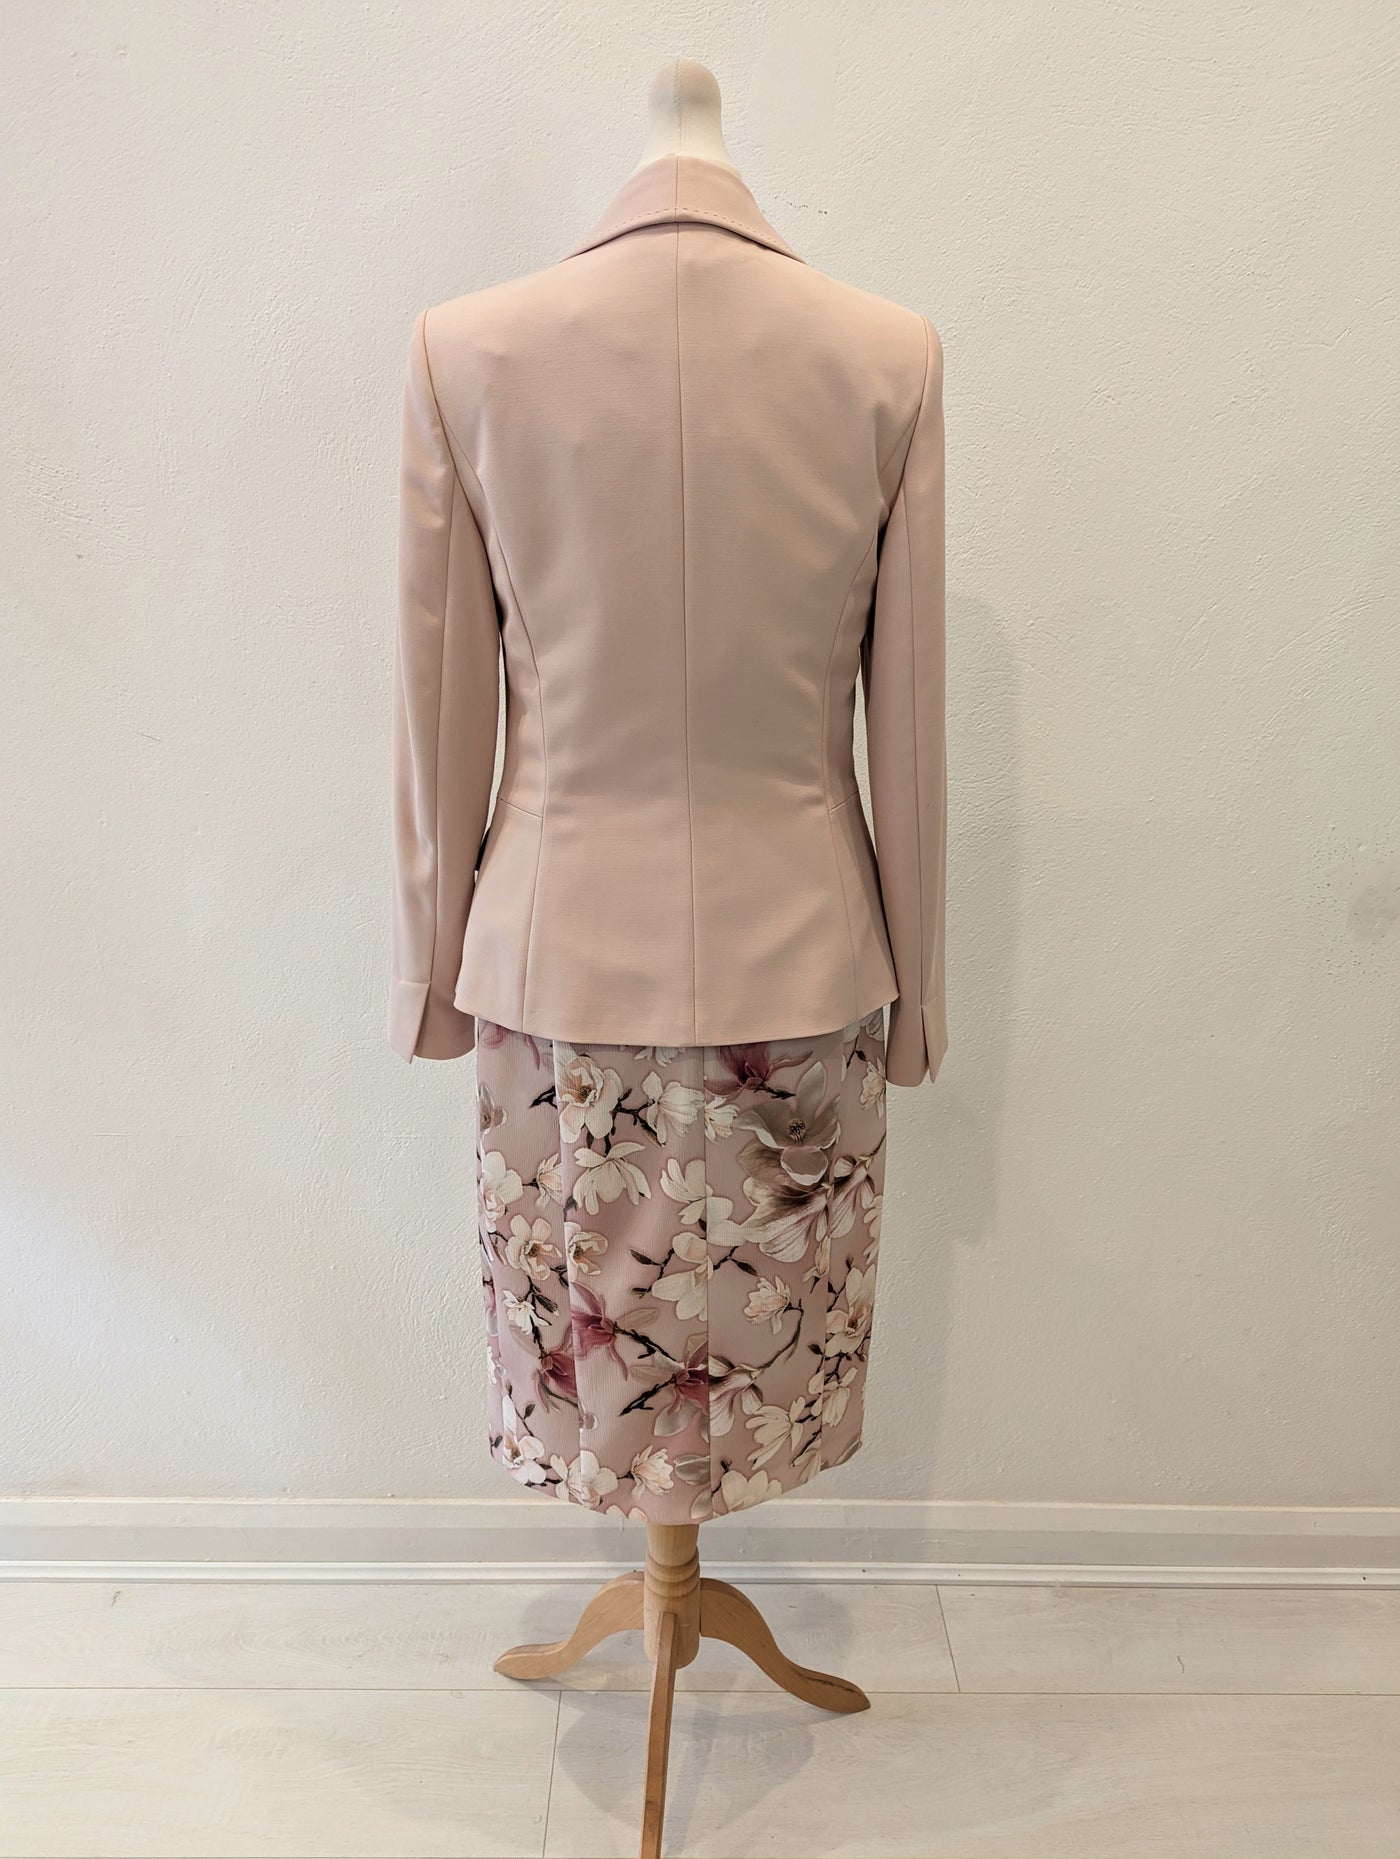 M&S/Phase Eight Blush Floral Dress 2 Piece 10